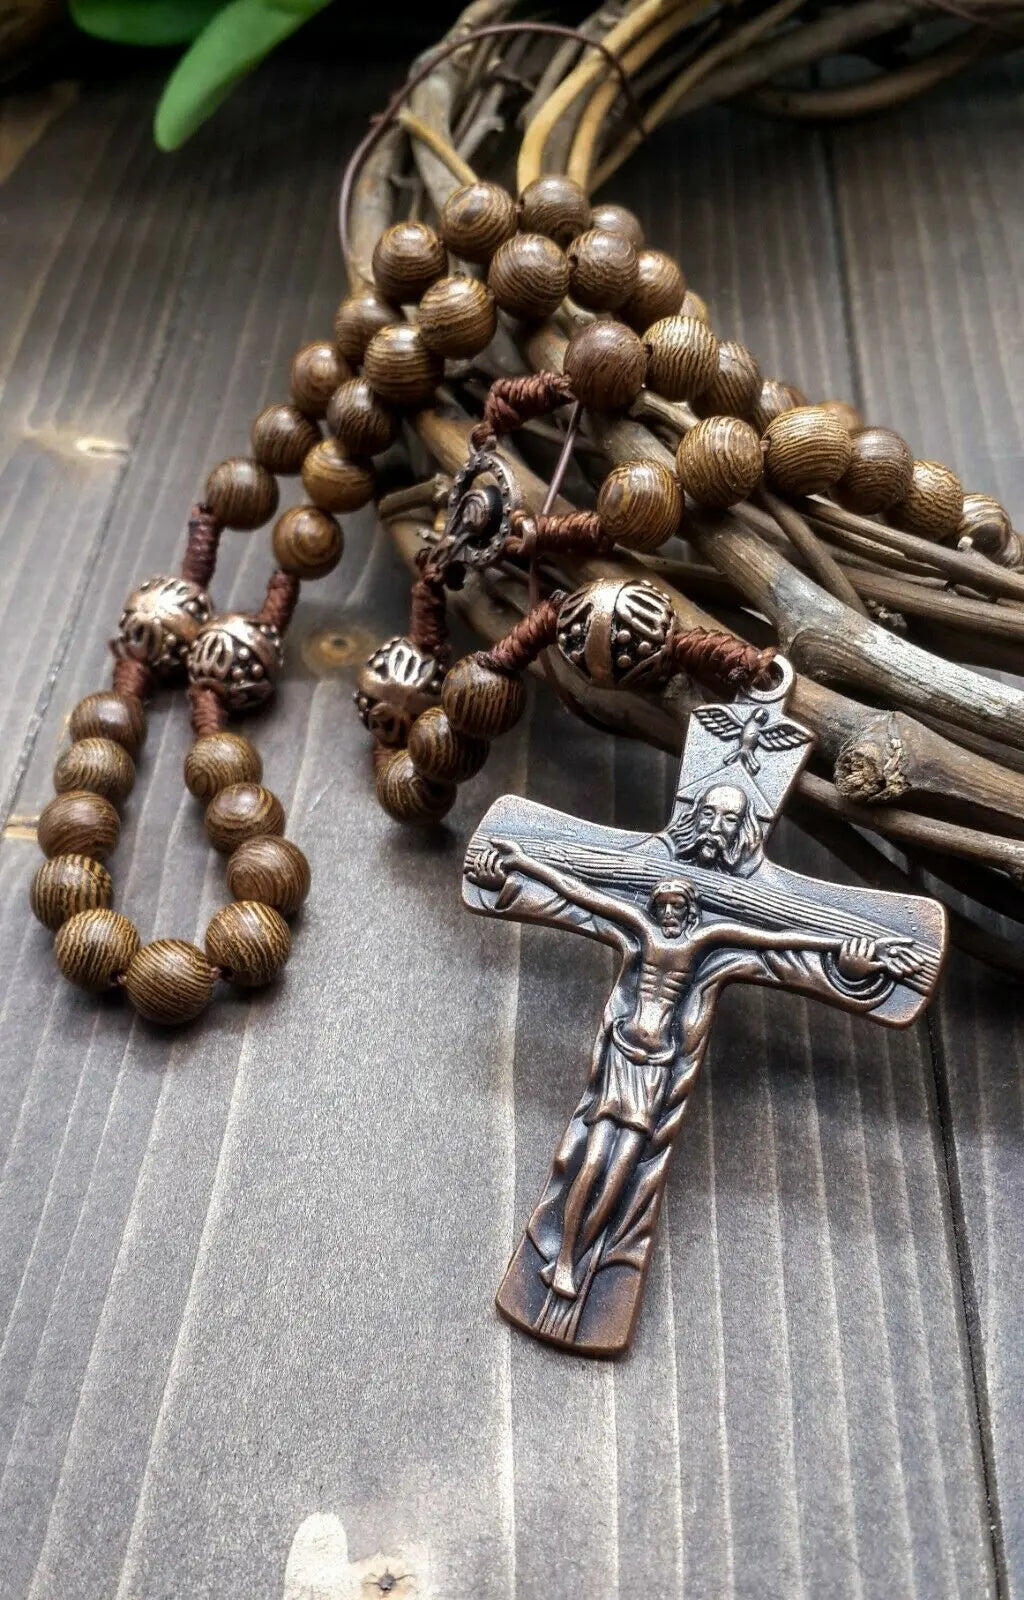 Wooden Rosary Necklace